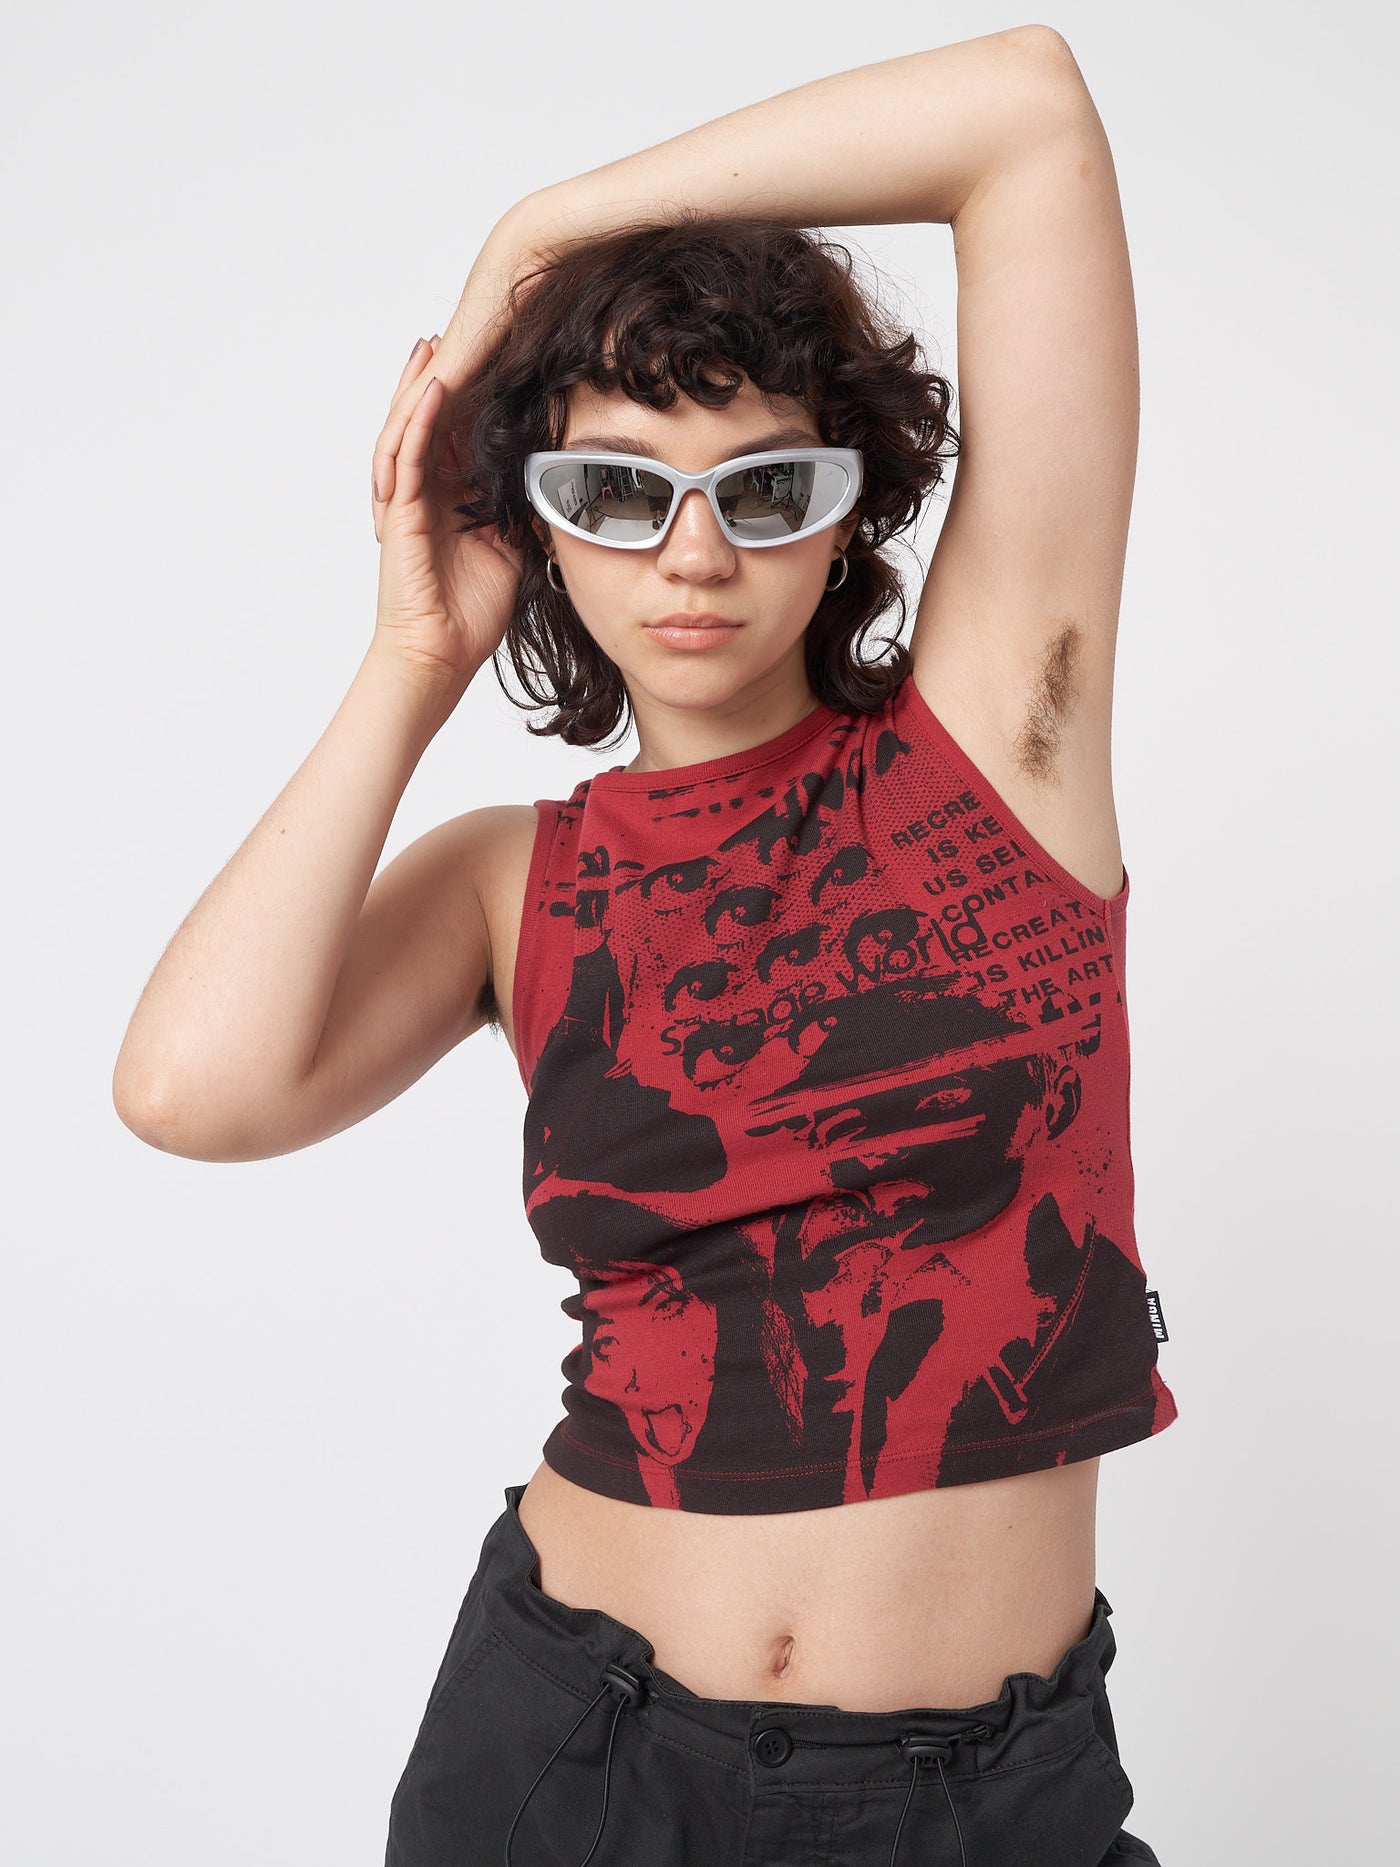 Vest top in red with y2k graphic front print in black